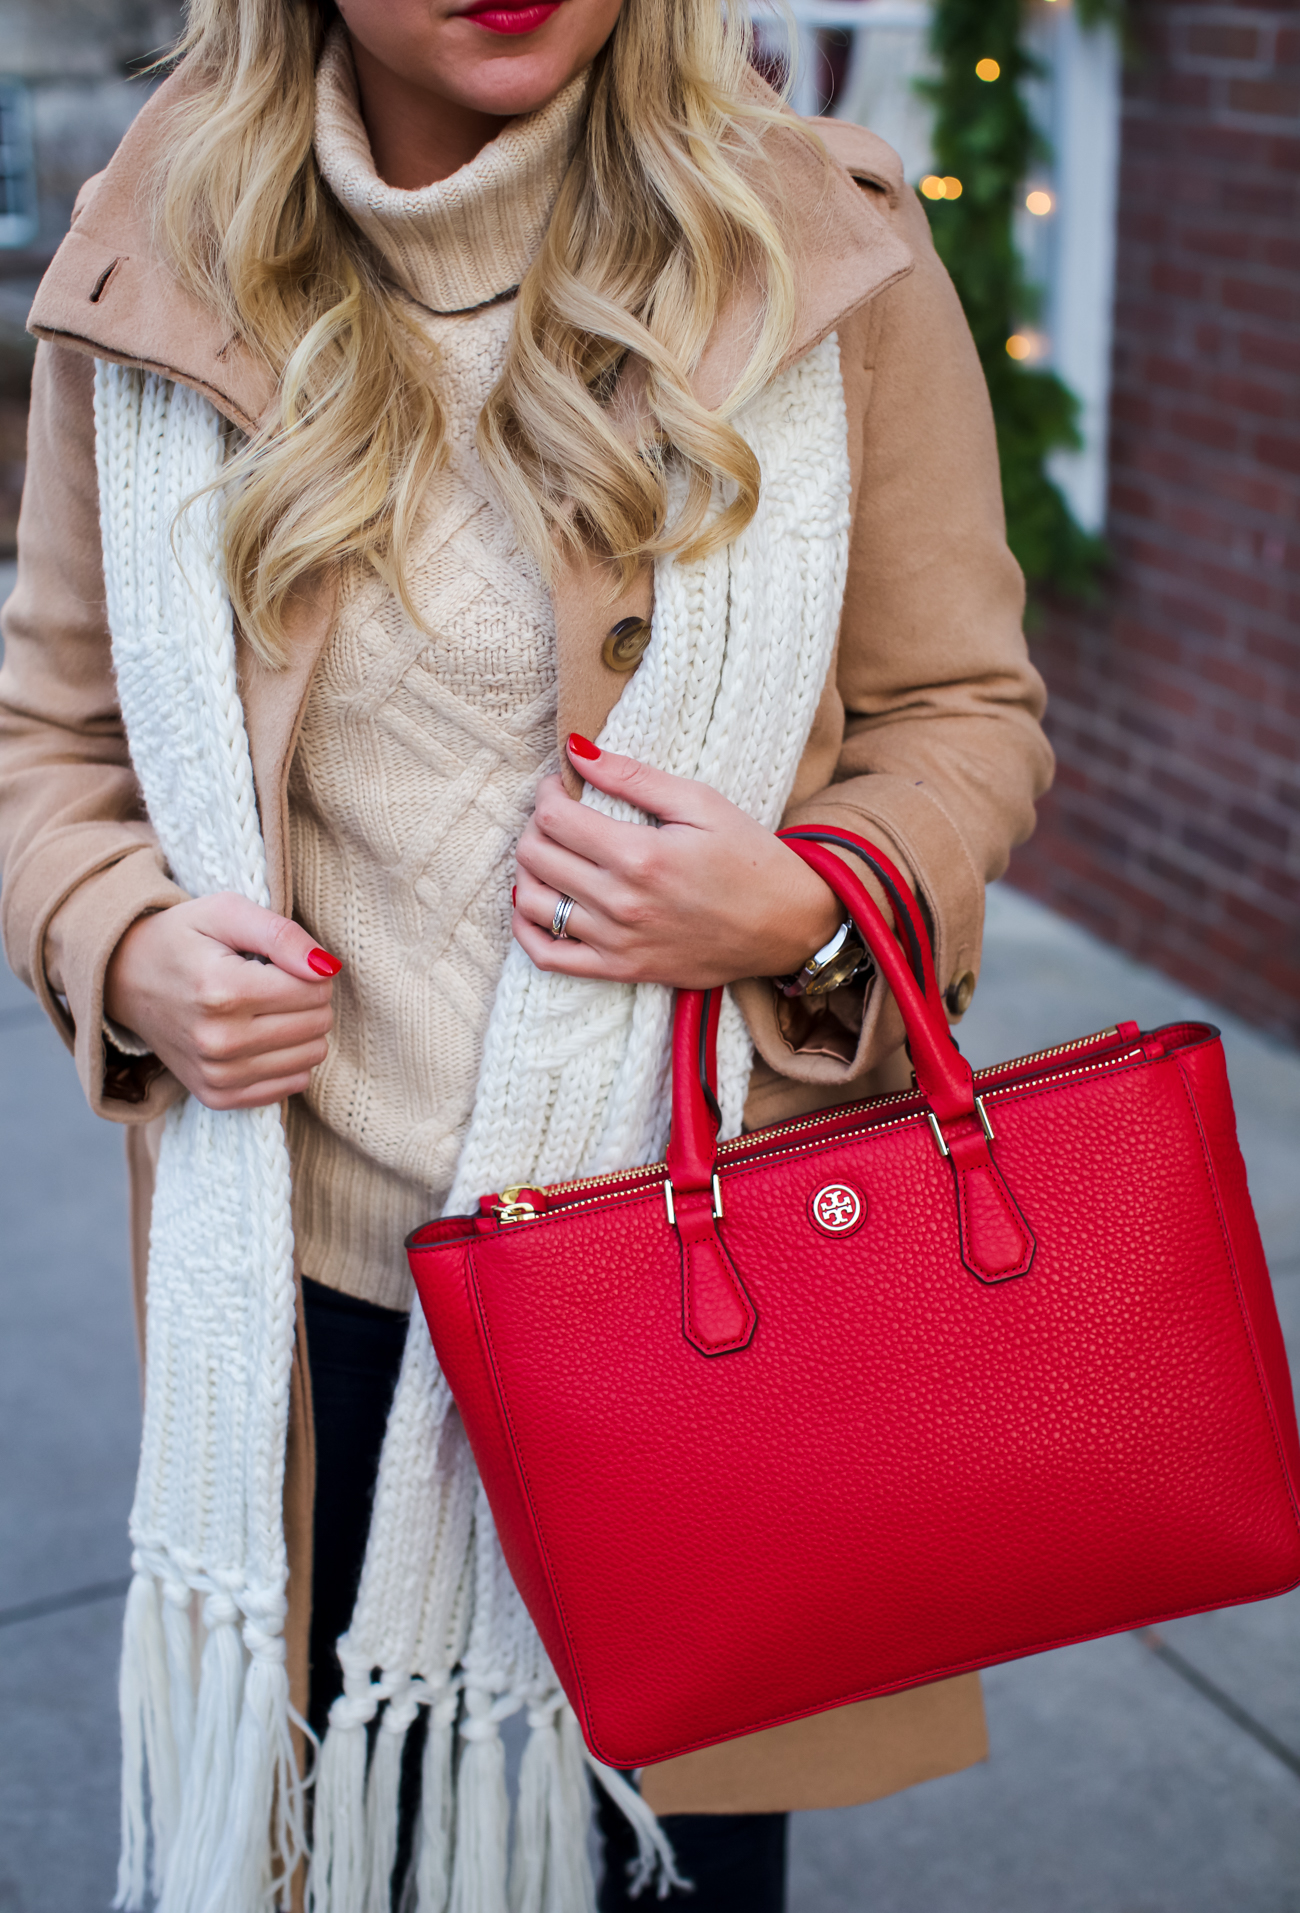 Loft Coat in tan with Nordstrom Topshop Knit Scarf with Ugg Lace Up Boots  Waterproof and Tory Burch Robinson Square Tote in Red-10 - SHOP DANDY | A  florida based style and